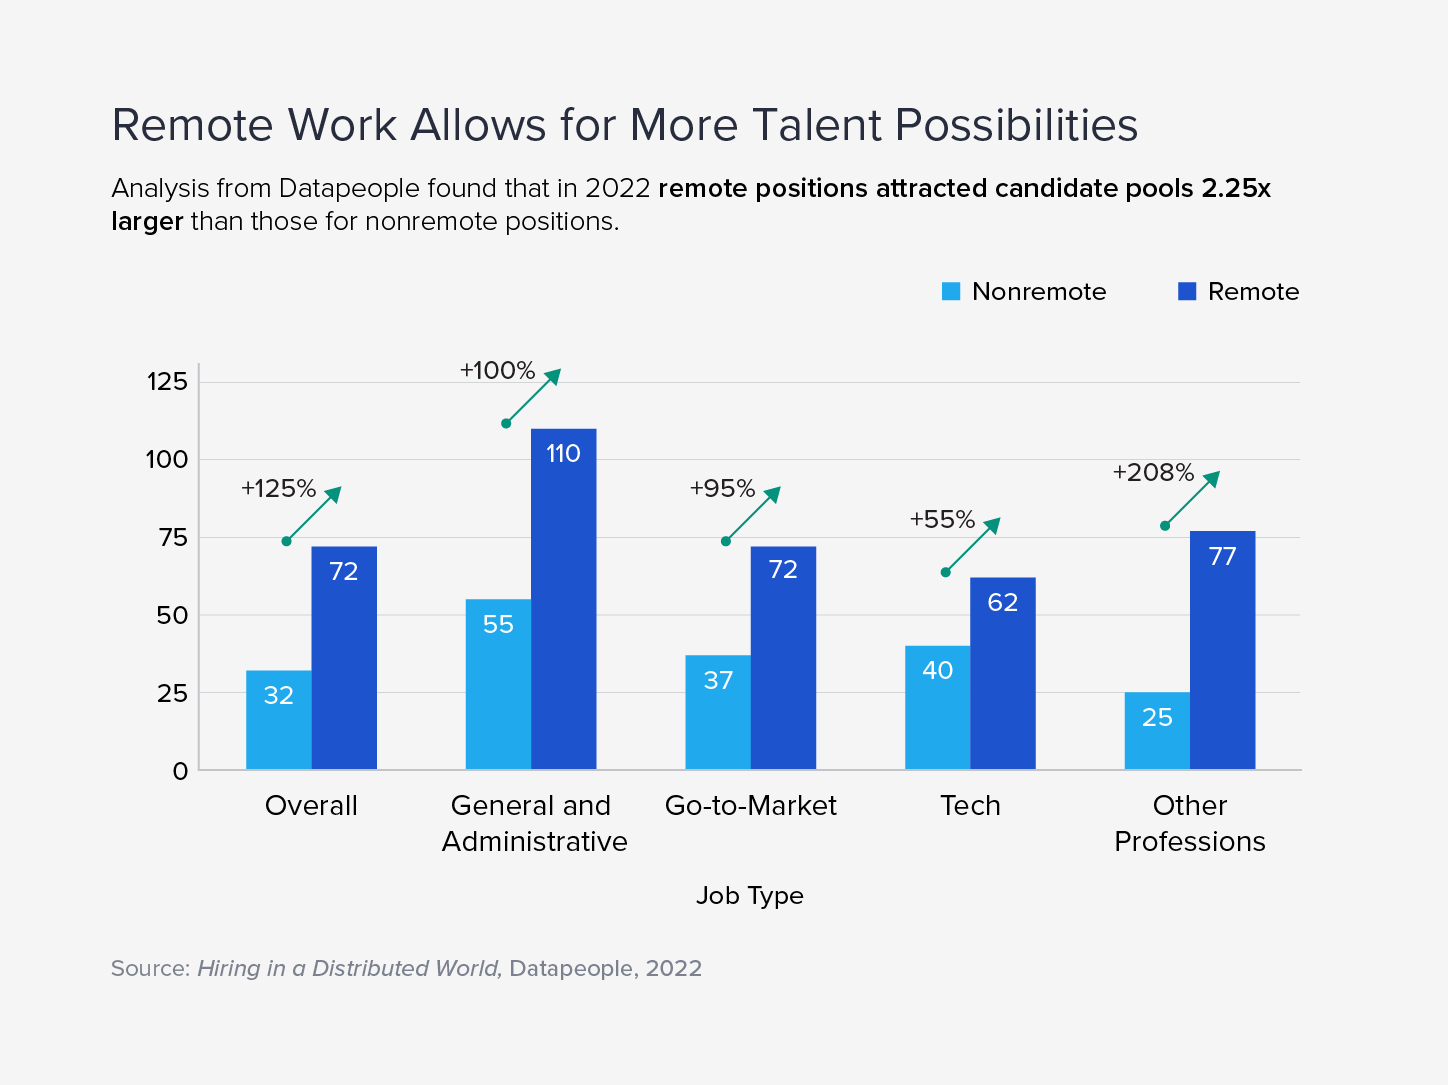 Analysis from Datapeople found that in 2022 remote positions attracted 2.25 times larger candidate pools than in-office positions.